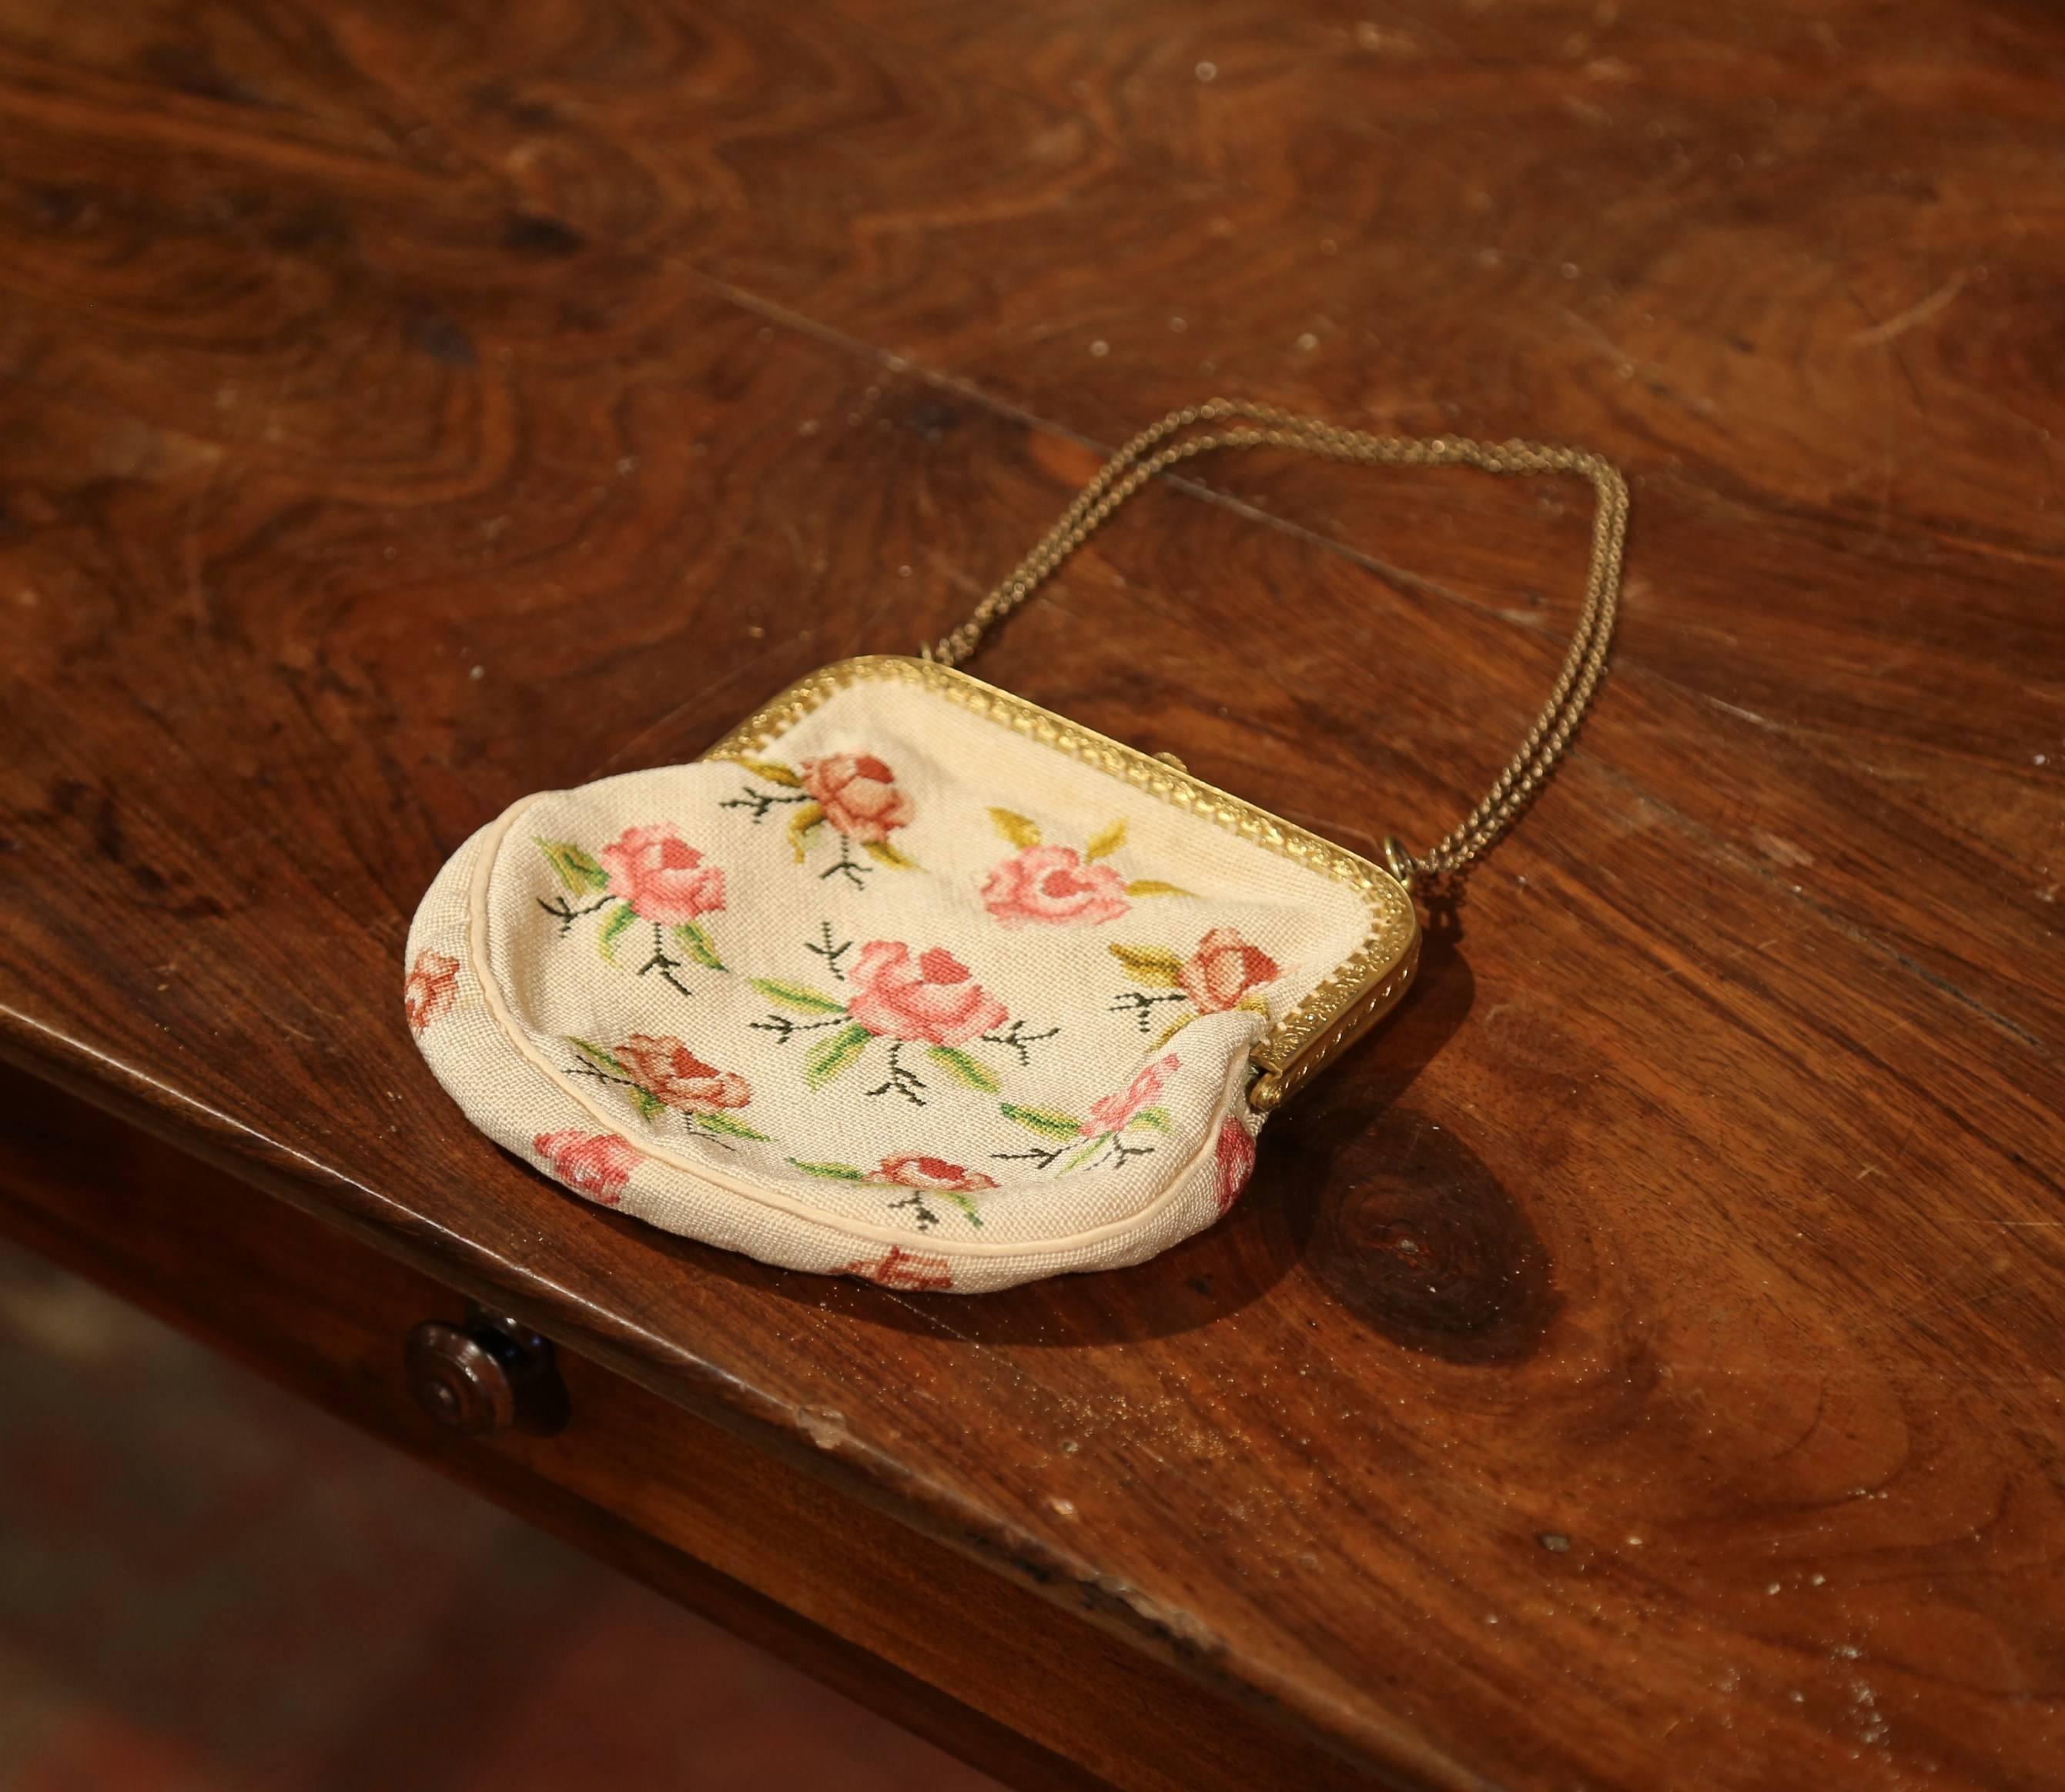 Elegant antique purse from France; handwoven circa 1860, the small colorful purse is handmade using needlepoint technique. It features pink roses with green leaves on both sides. It is further embellished with a brass shoulder strap and brass